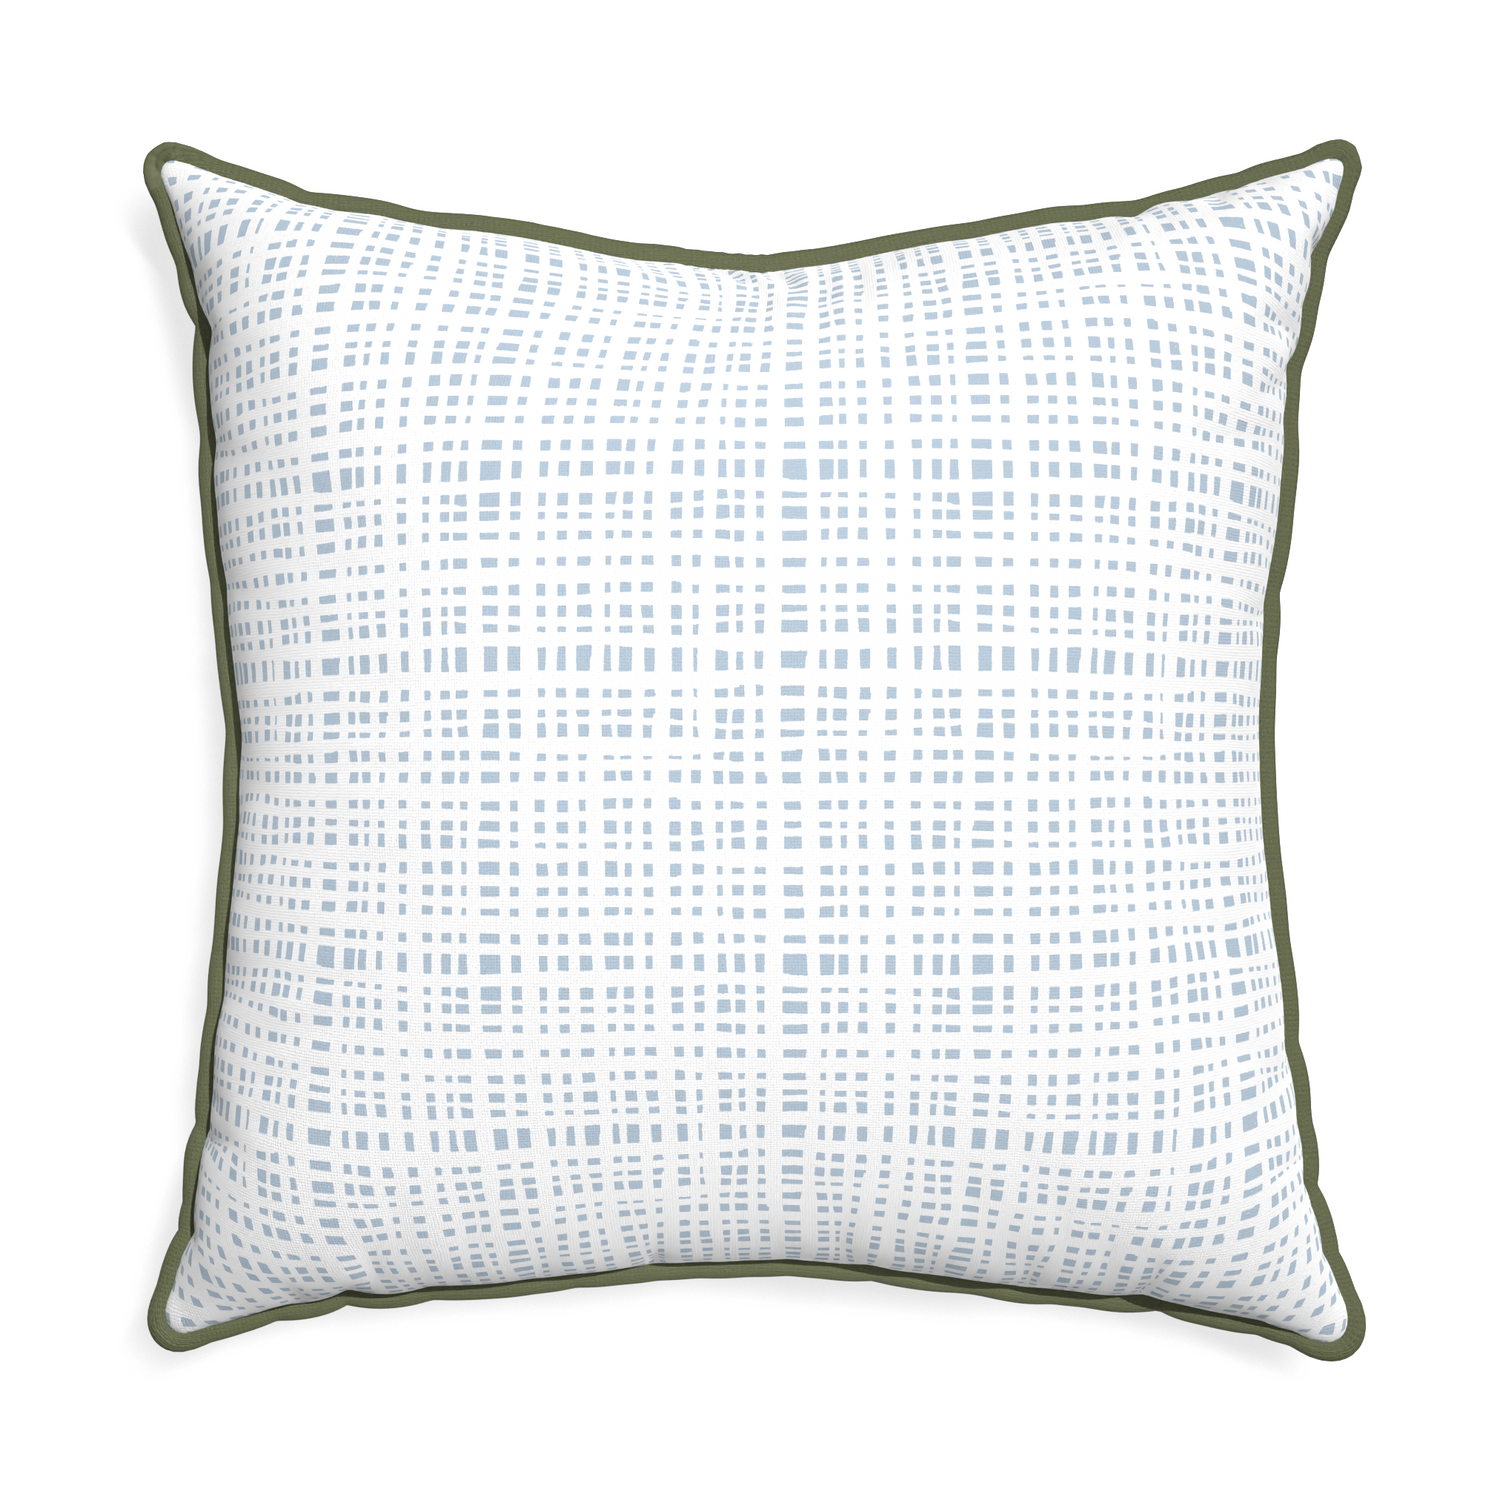 Euro-sham ginger sky custom pillow with f piping on white background